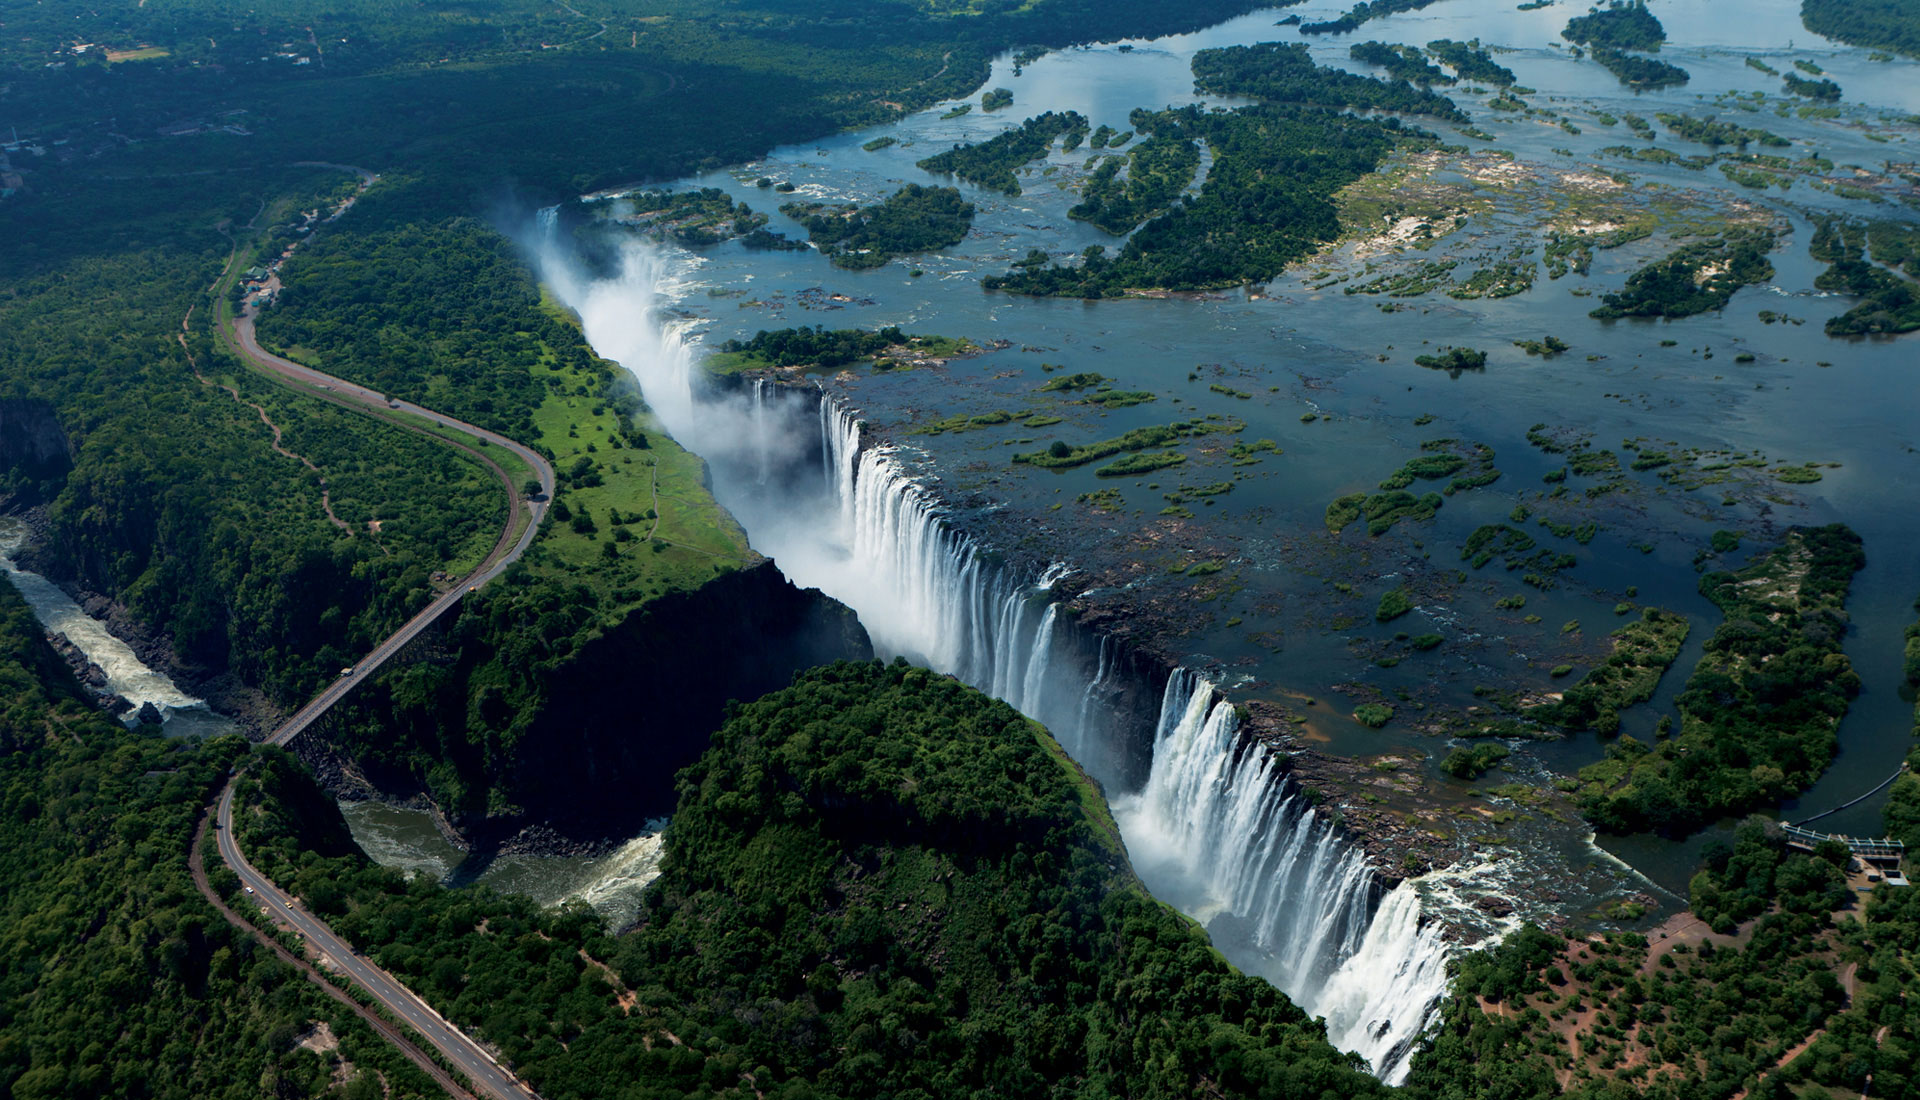 South Africa with Victoria Falls.